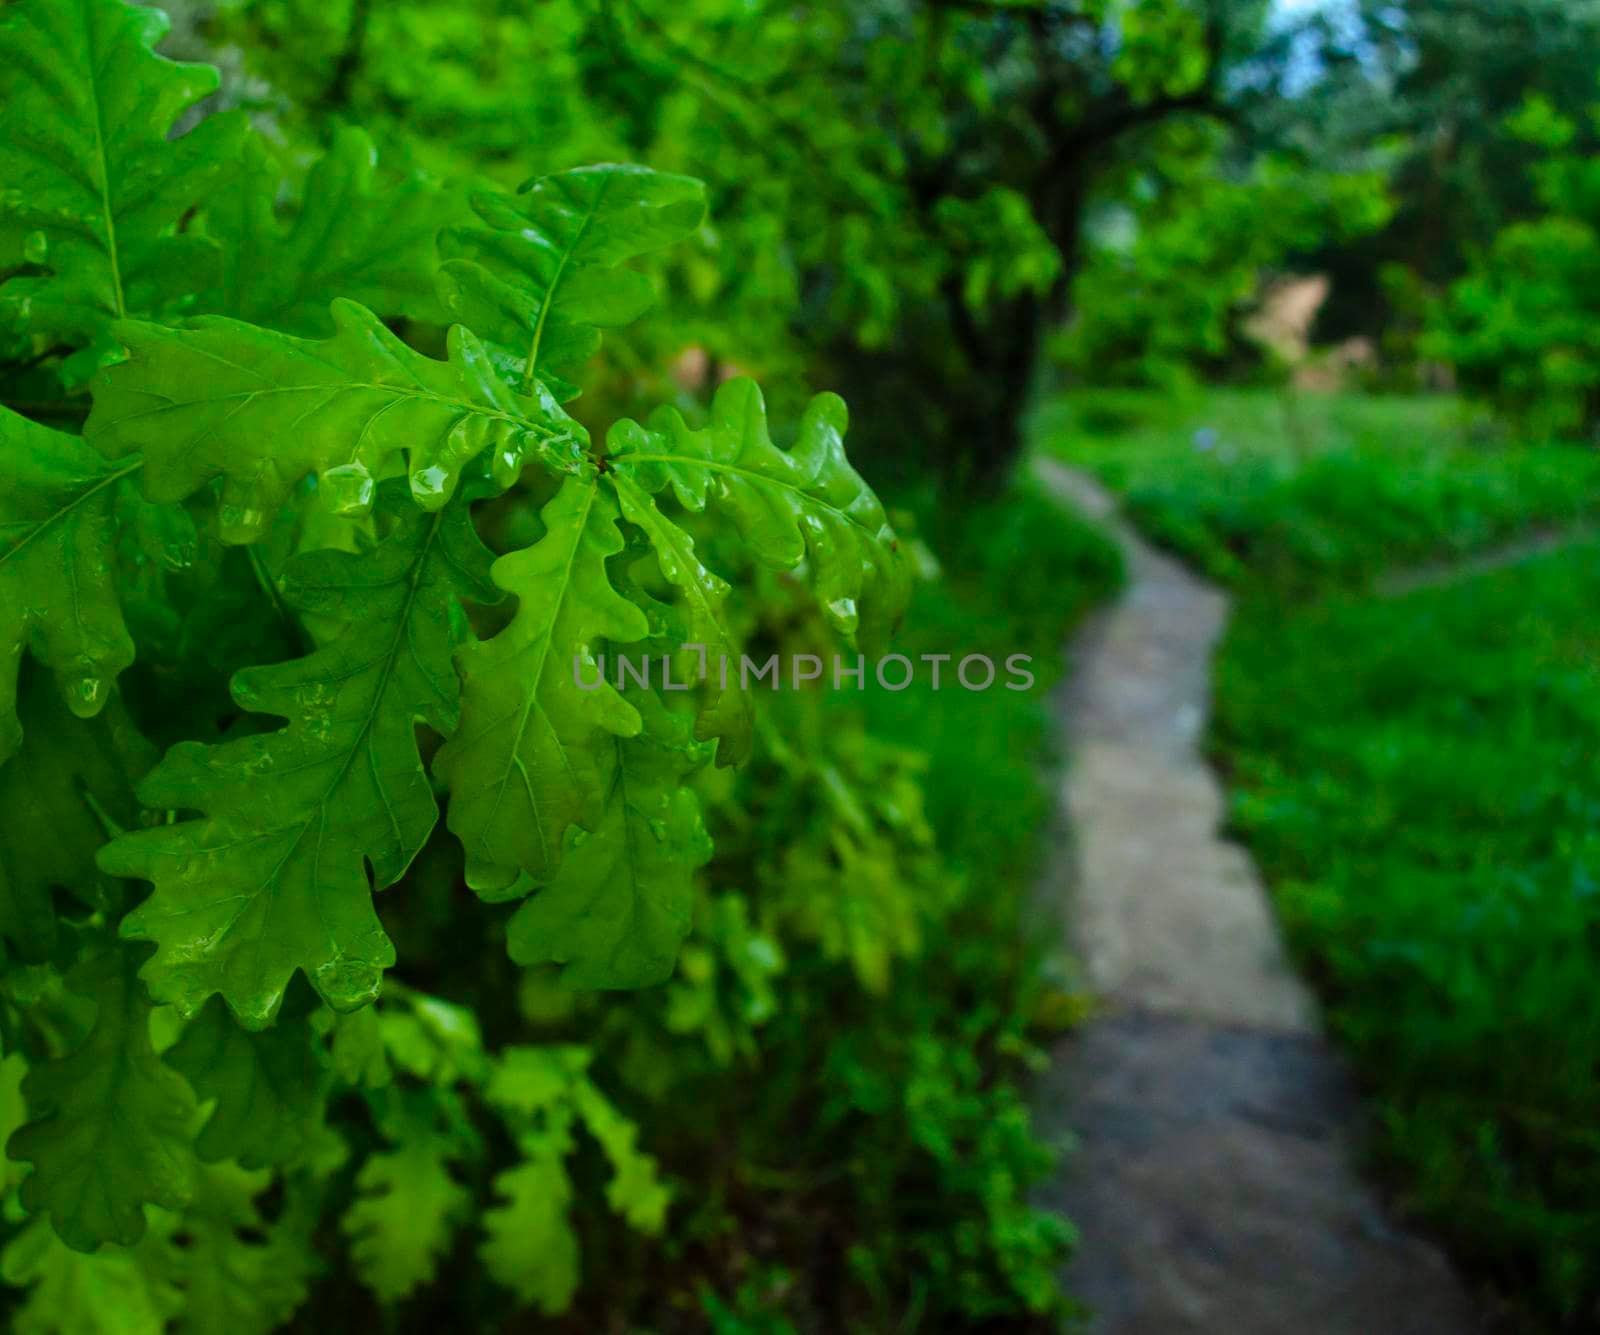 Oak leaves in drops of rain. Spring evening landscape with a path in the garden. The smell of freshness and greenery. Nice green background for selling natural products